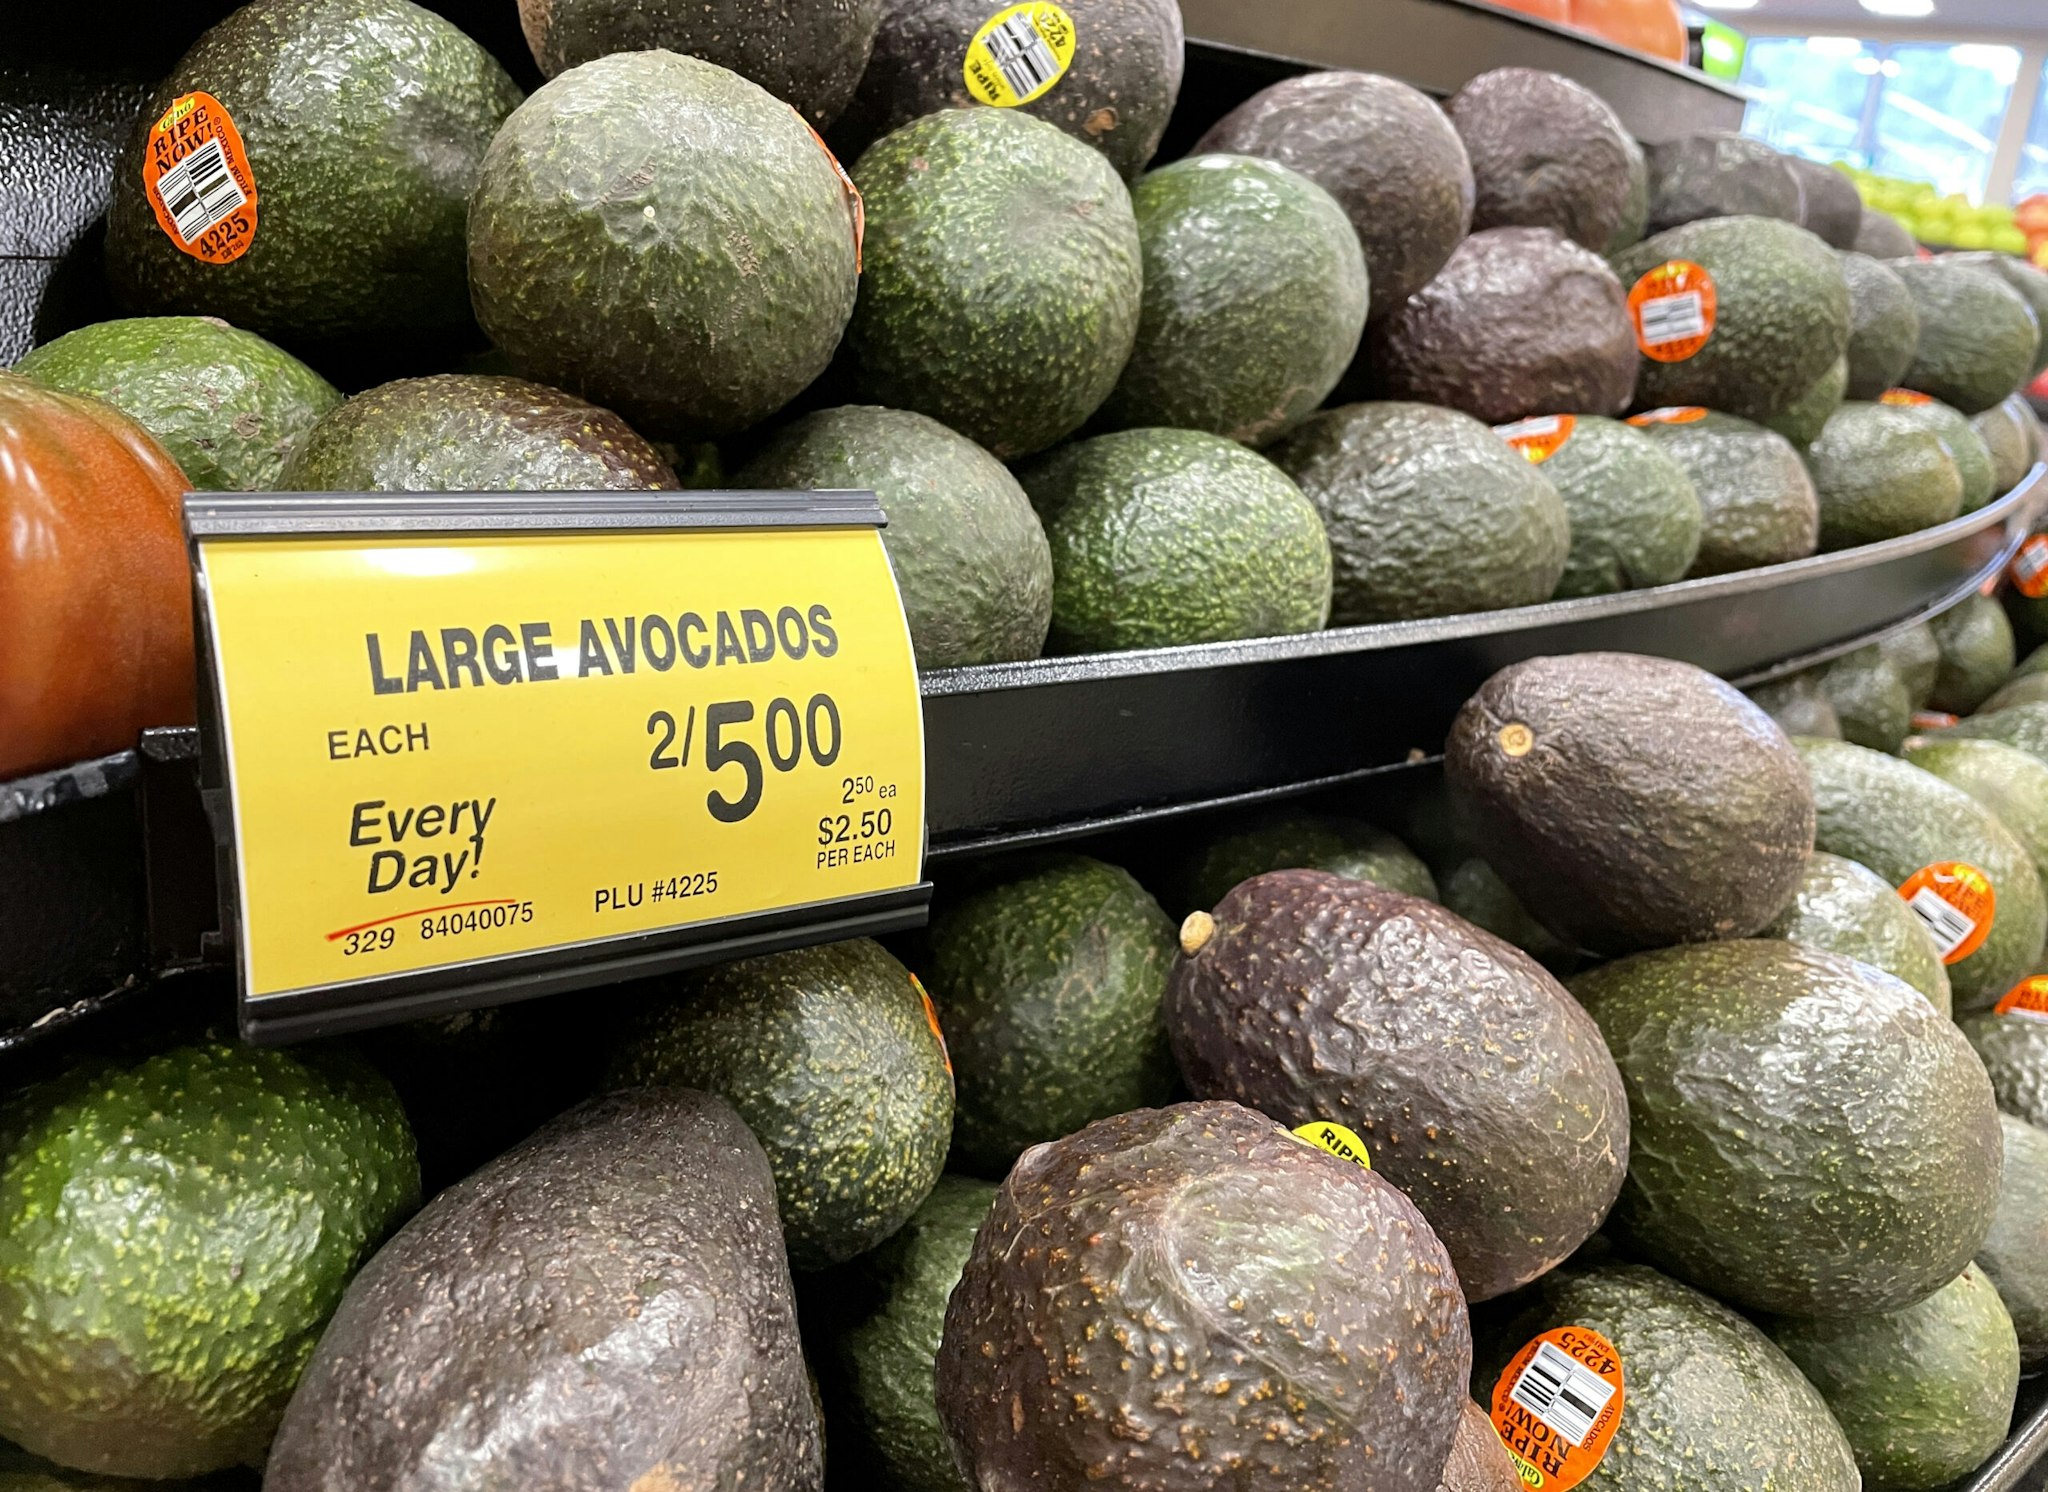 SAN ANSELMO, CALIFORNIA - FEBRUARY 07: Hass avocados are displayed in the produce section at a Safeway store on February 07, 2022 in San Anselmo, California. A week ahead of Super Bowl Sunday, the price of fresh avocados and guacamole is surging as the popular fruit is facing supply chain issues. According to a report by Bloomberg News, the price of avocados from the Michoacan growing region in Mexico has reached the highest level in two decades with a 20 pound case selling for approximately $26. Americans consume more avocados and guacamole on Super Bowl Sunday than any other day in a typical year.